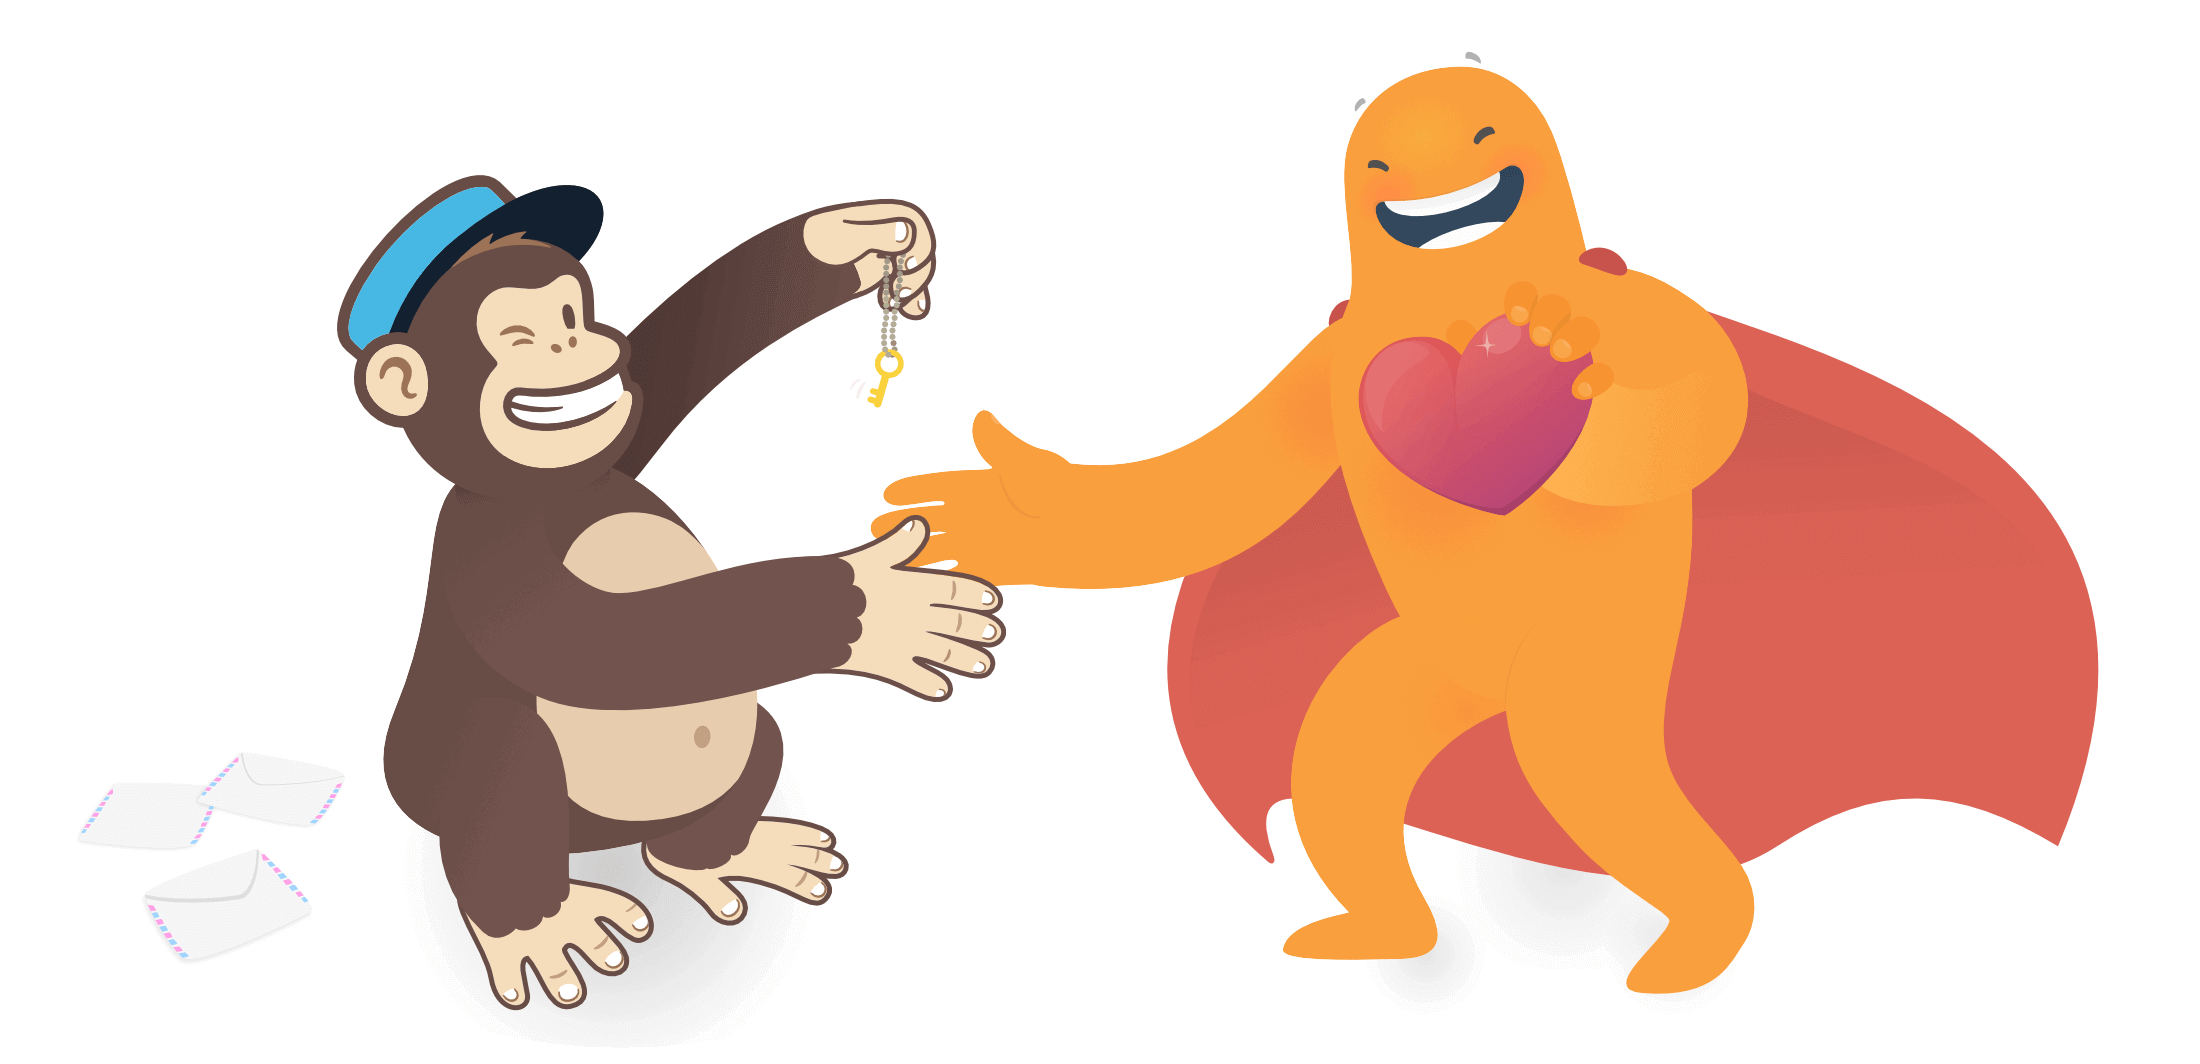 An illustration showing SurveyLegend's mascot and Mailchimp's chimpanzee Freddie, becoming friends